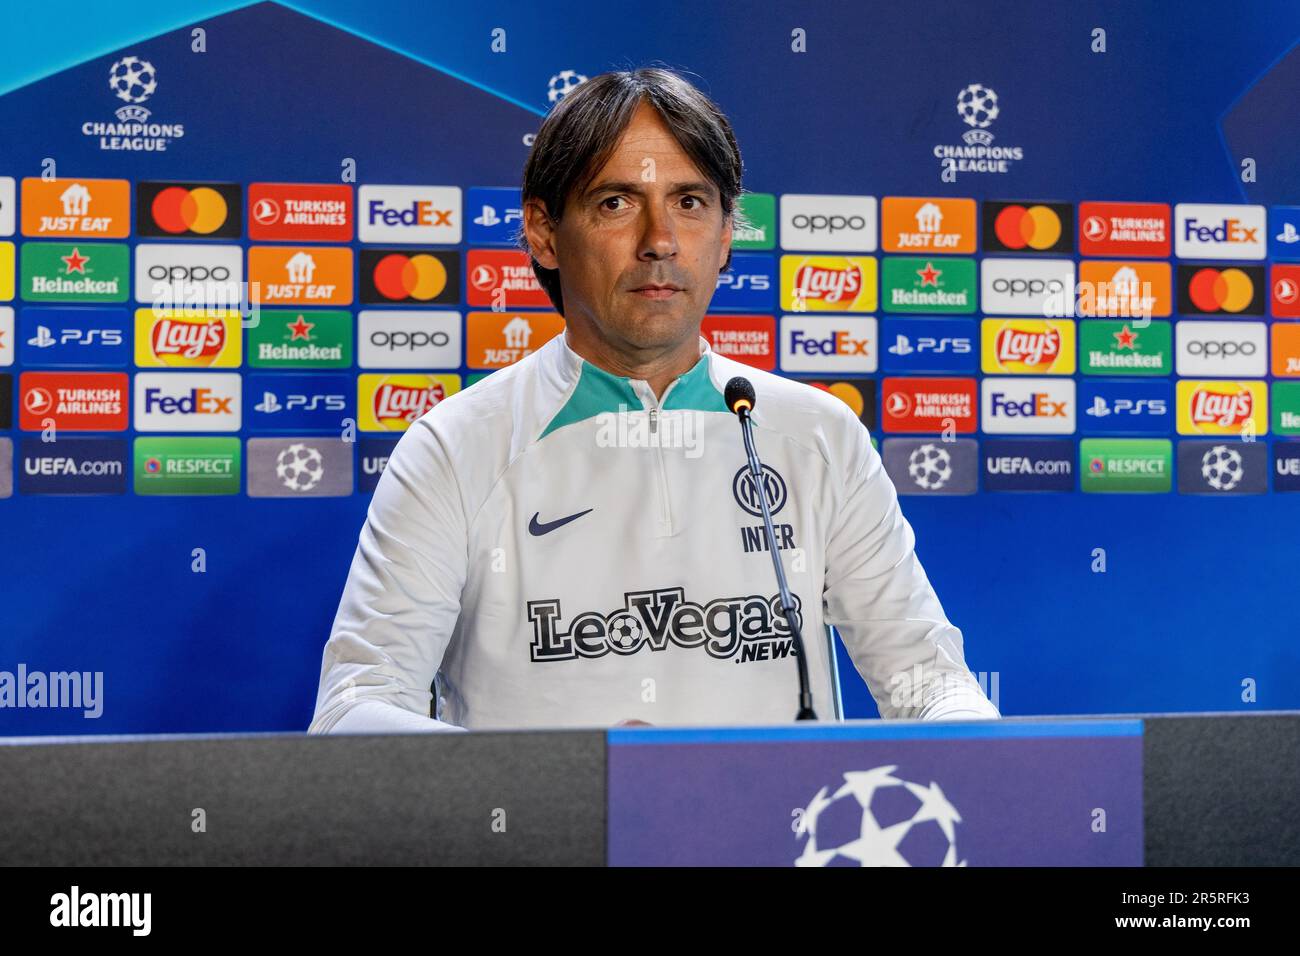 Appiano Gentile, Italy -june 5 2023 - F.C. Internazionale media day for Champions League final Istanbul - simone inzaghi coach Credit: Kines Milano/Alamy Live News Stock Photo